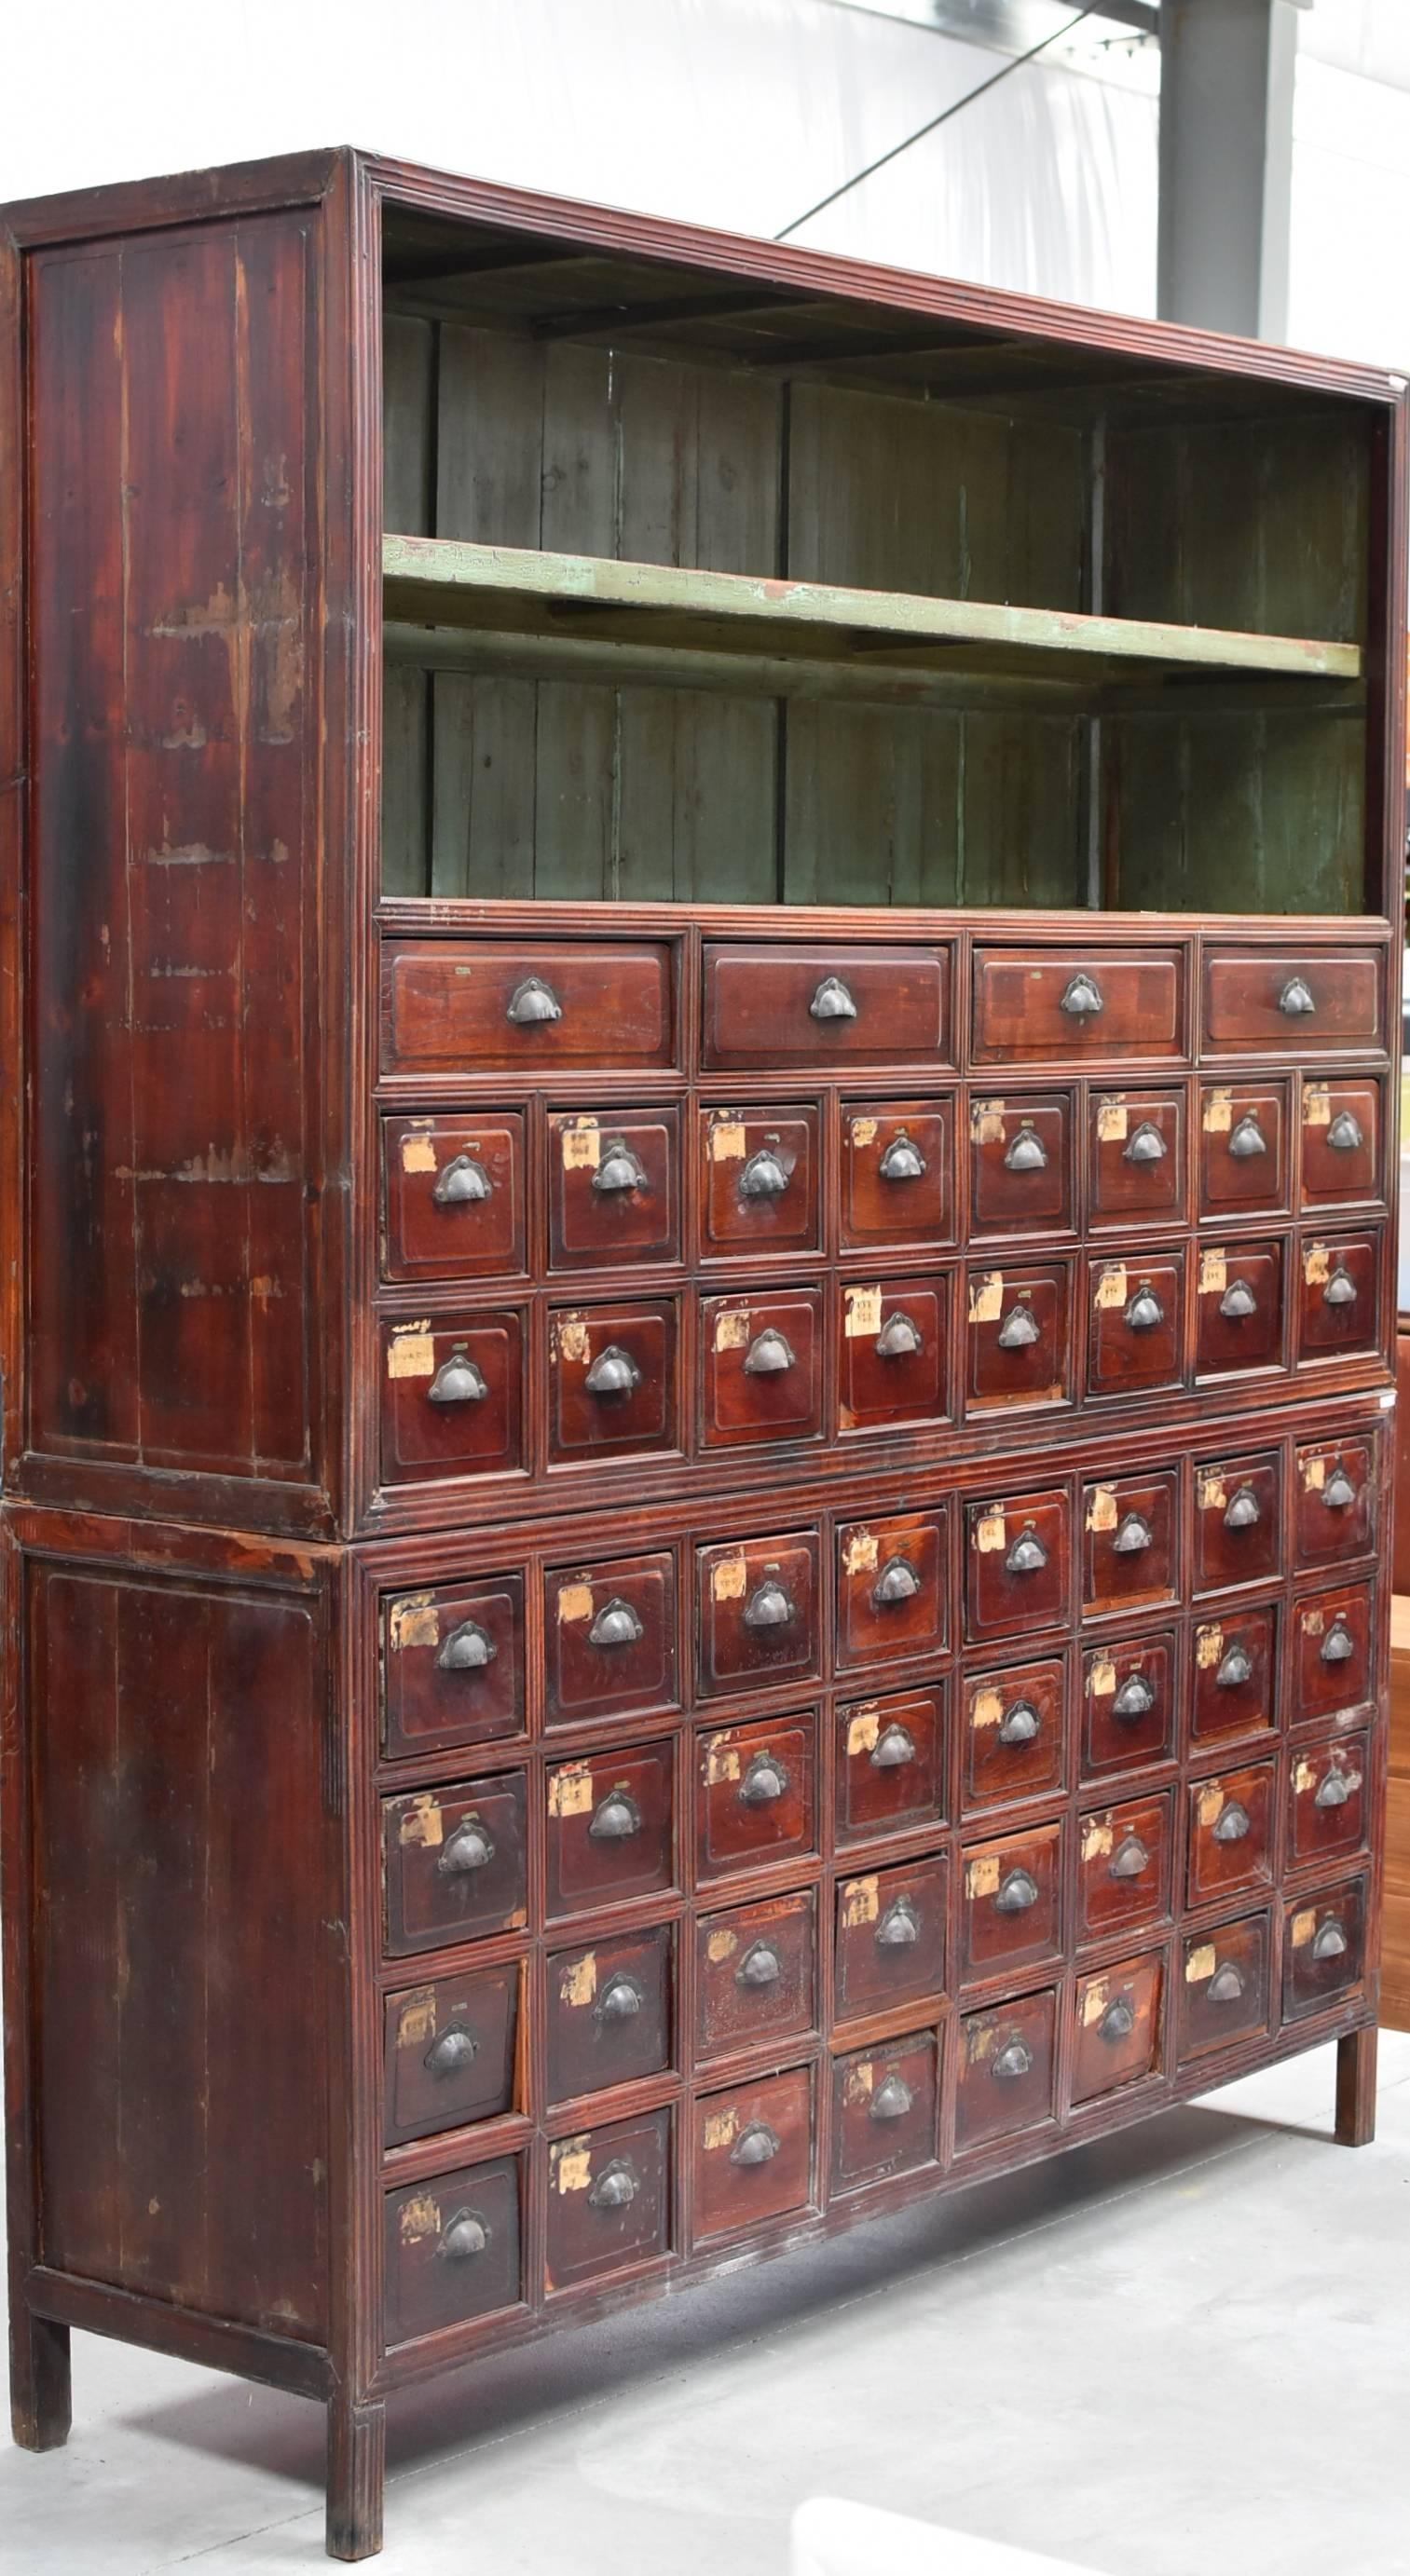 At over 7' tall, over 6' wide, this magnificent cabinet is one of the most impressive Apothecary chests we have seen. There are 52 drawers total. The small drawers have two-section dividers and the large ones have four-sections. An 